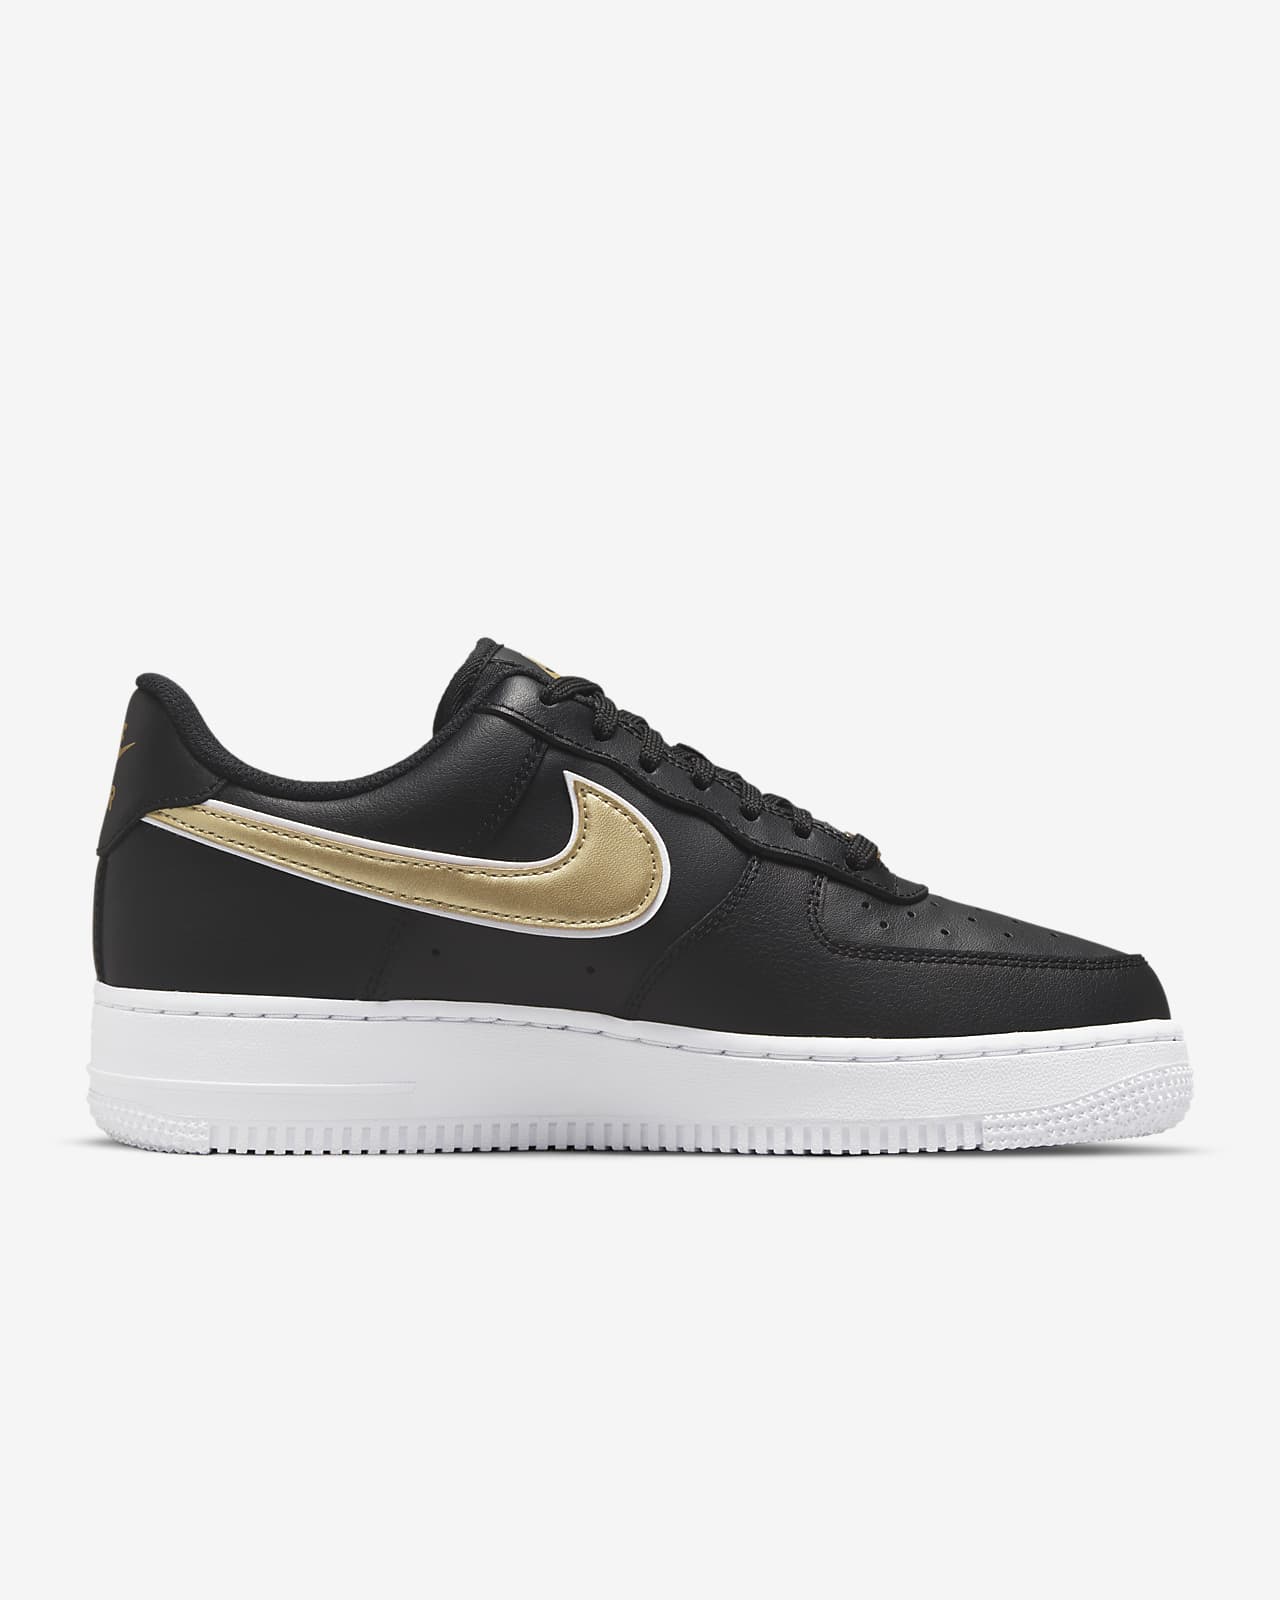 black and gold nike air force 1's